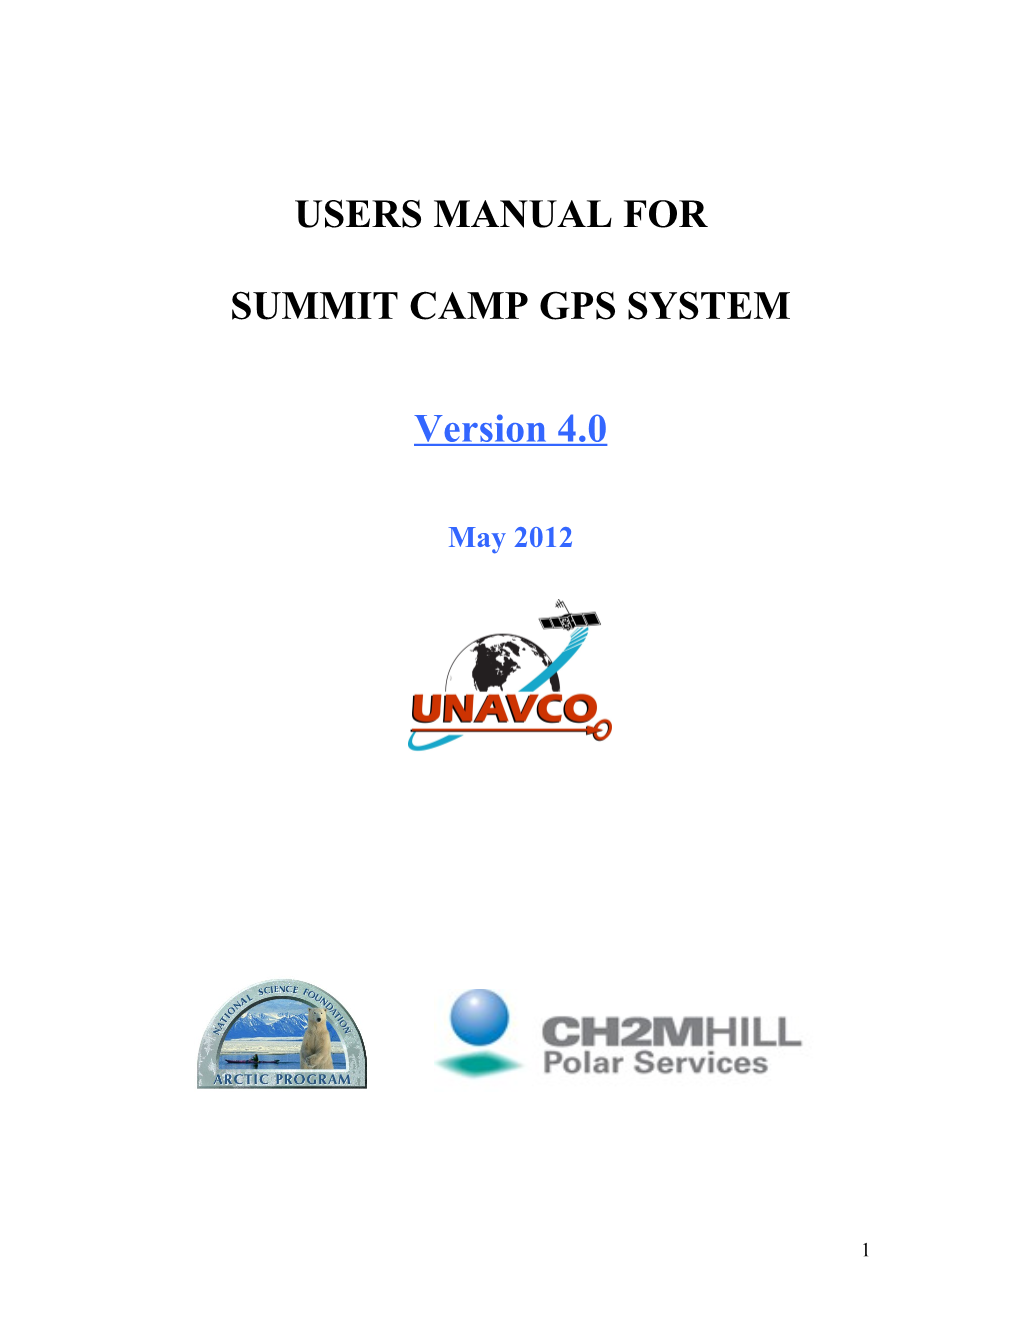 Operating Manual for Summit Camp GPS System, Version 0